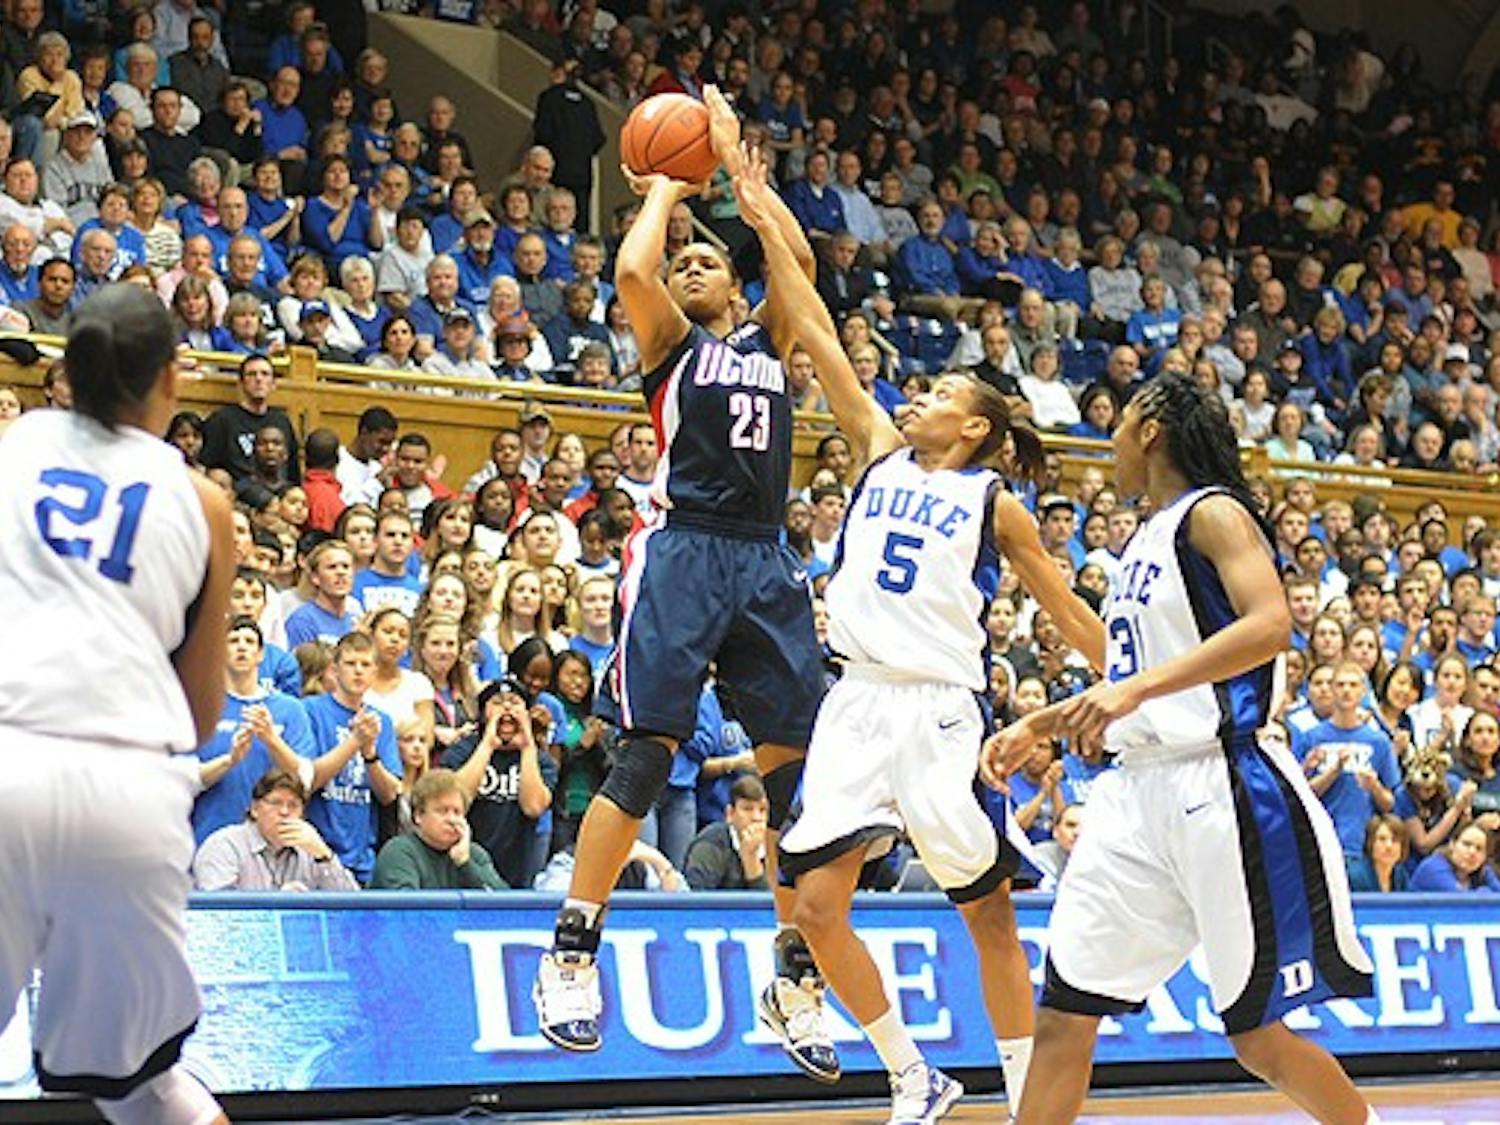 Connecticut forward Maya Moore scored a quiet 20 points, most of them from the perimeter, to help kill any Duke hopes Monday.